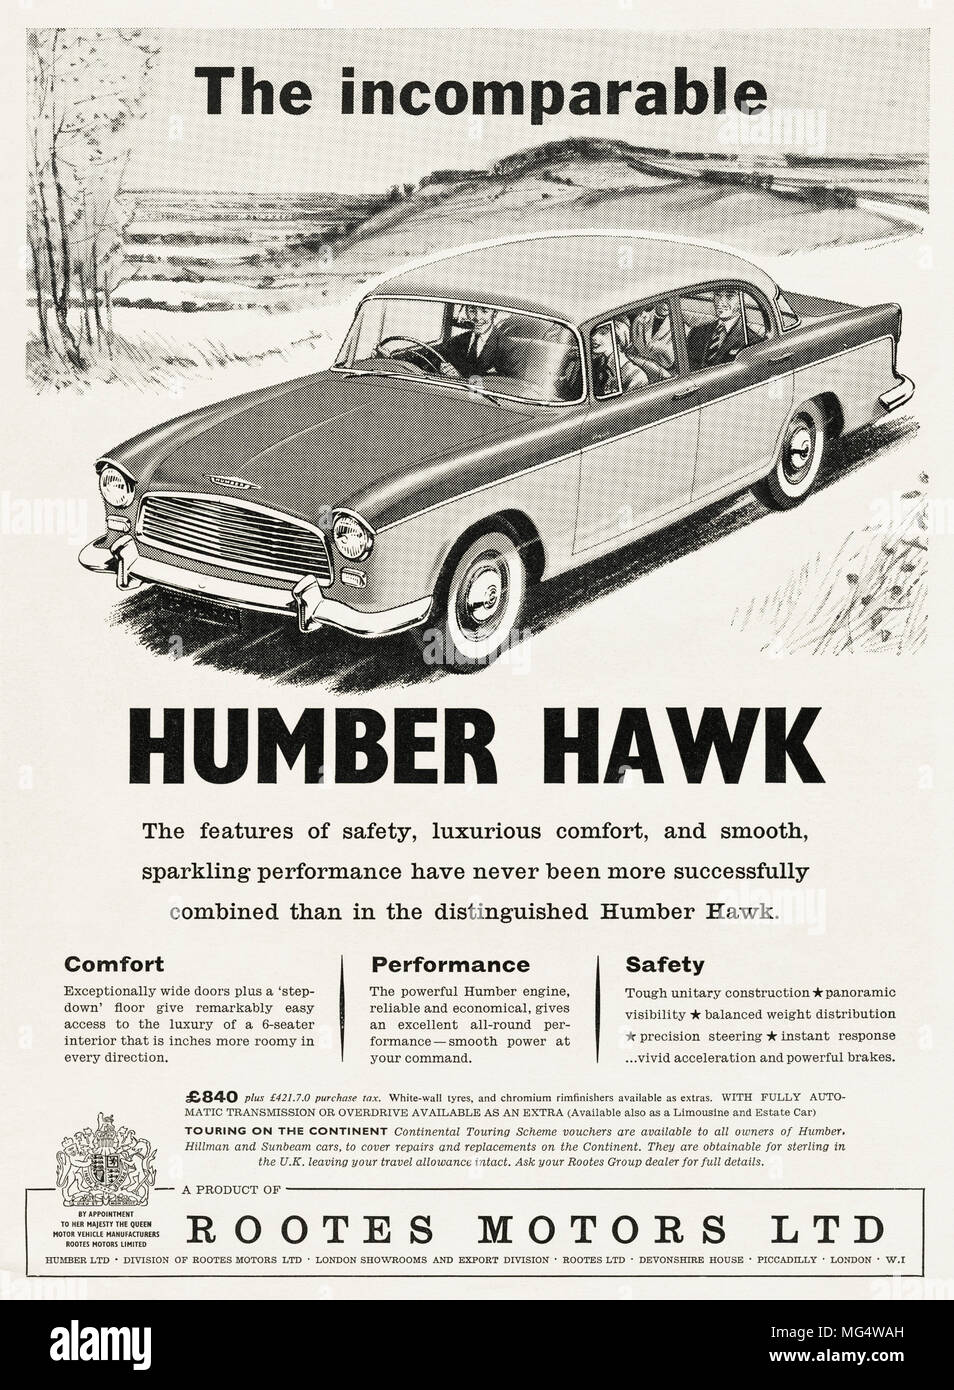 1950s original vintage advertisement advertising new Humber Hawk family saloon car by Rootes Motors Ltd by Royal Appointment in English magazine circa 1958 Stock Photo